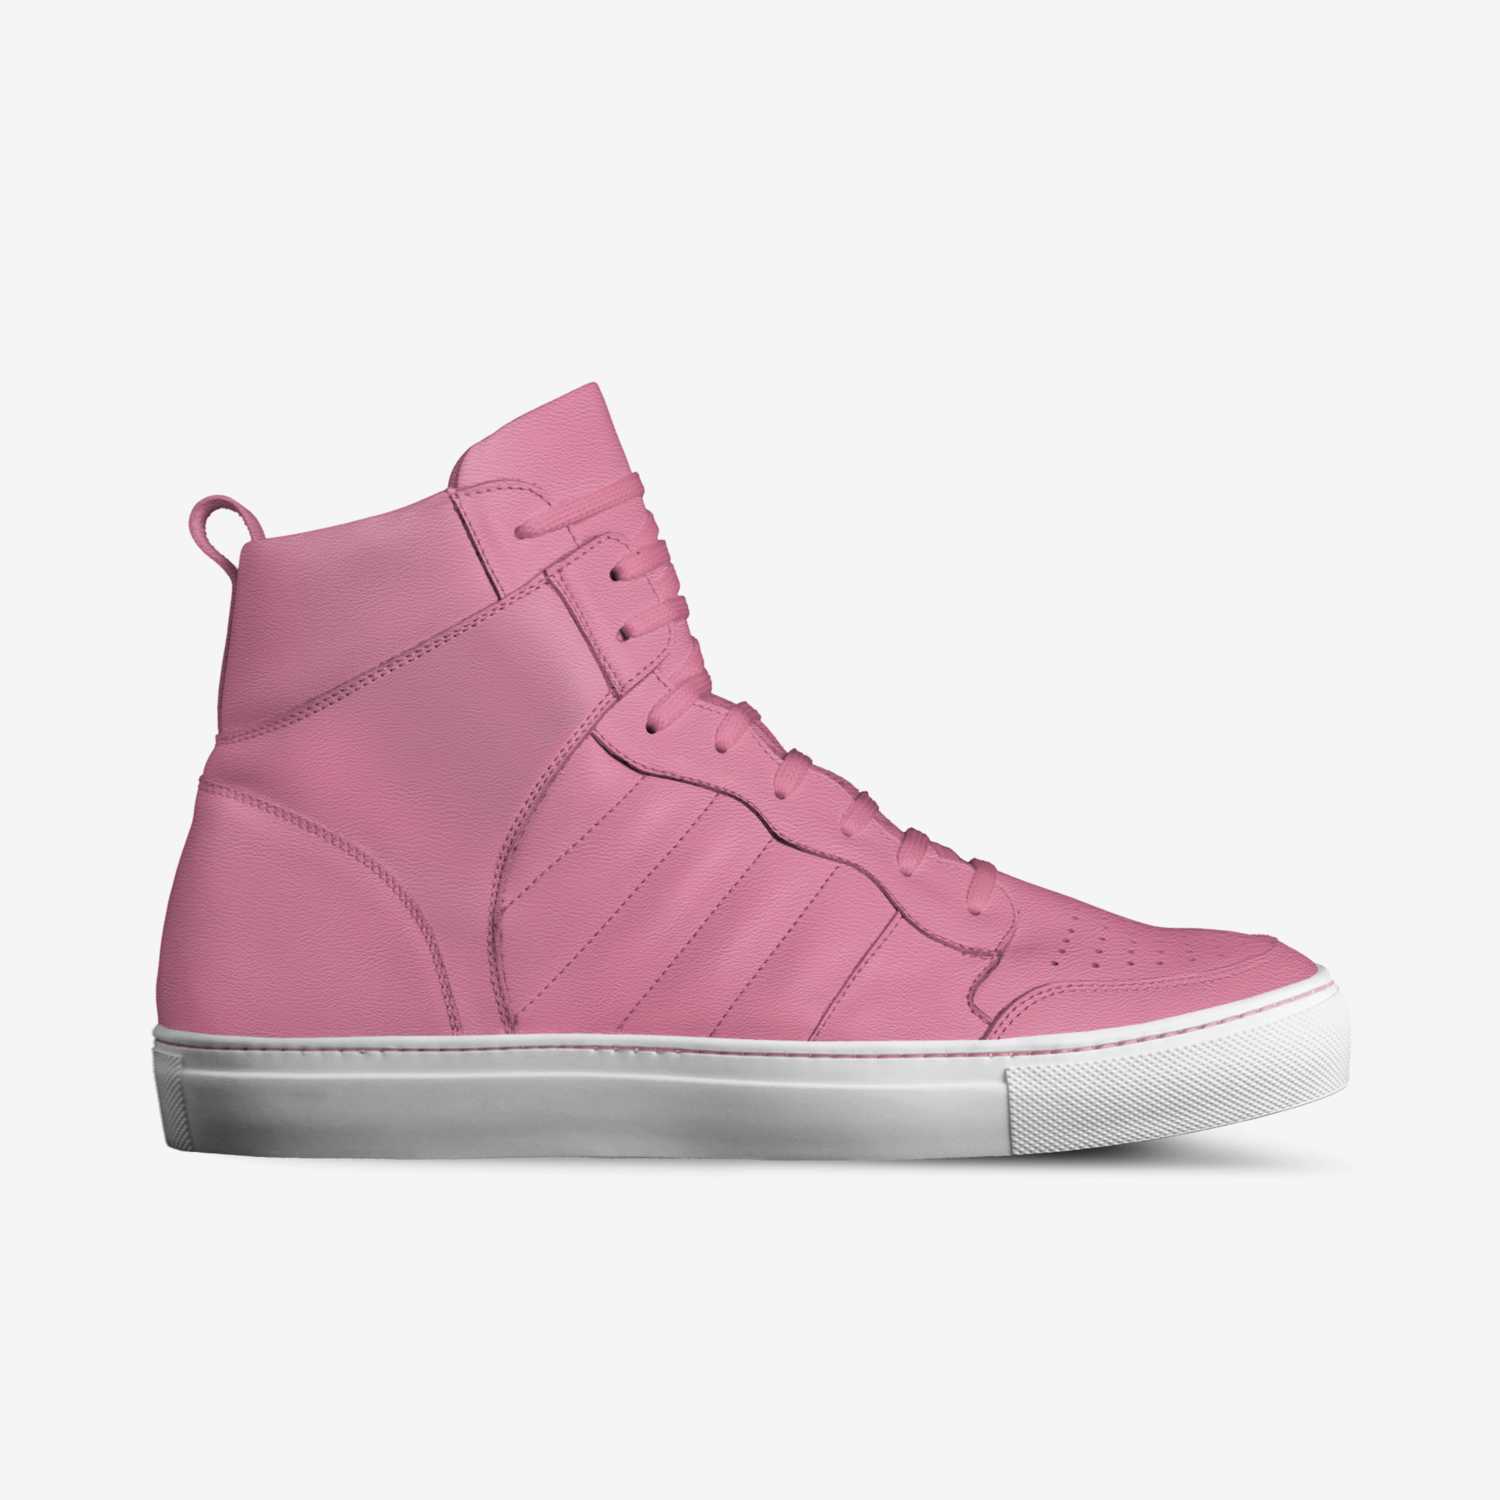 Pink High Tops custom made in Italy shoes by Omar Thomas | Side view